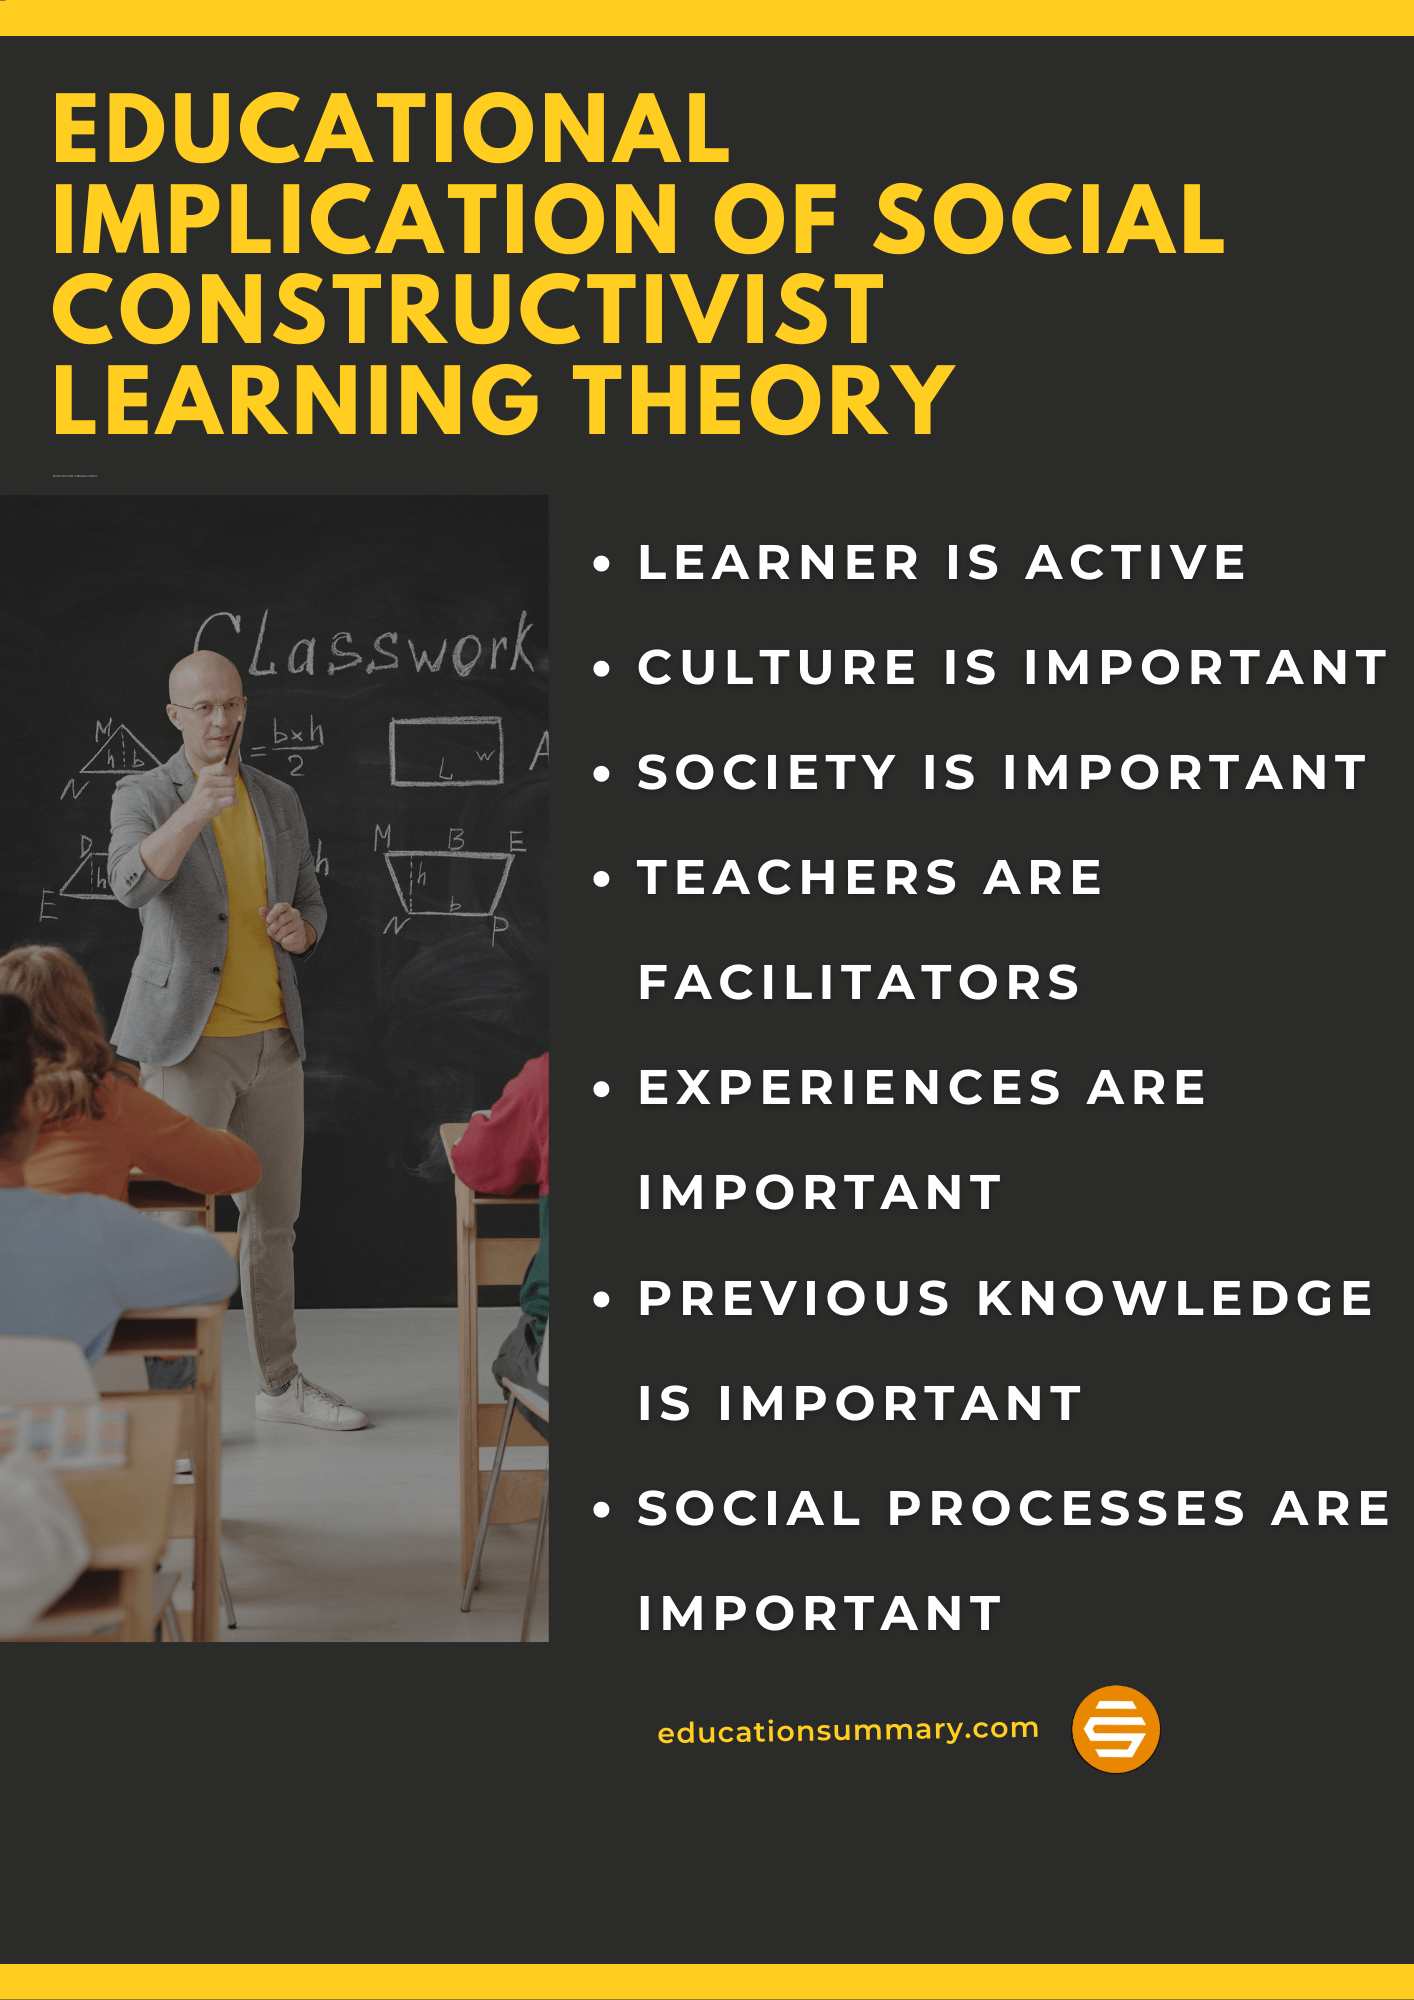 jean piaget constructivism learning theory